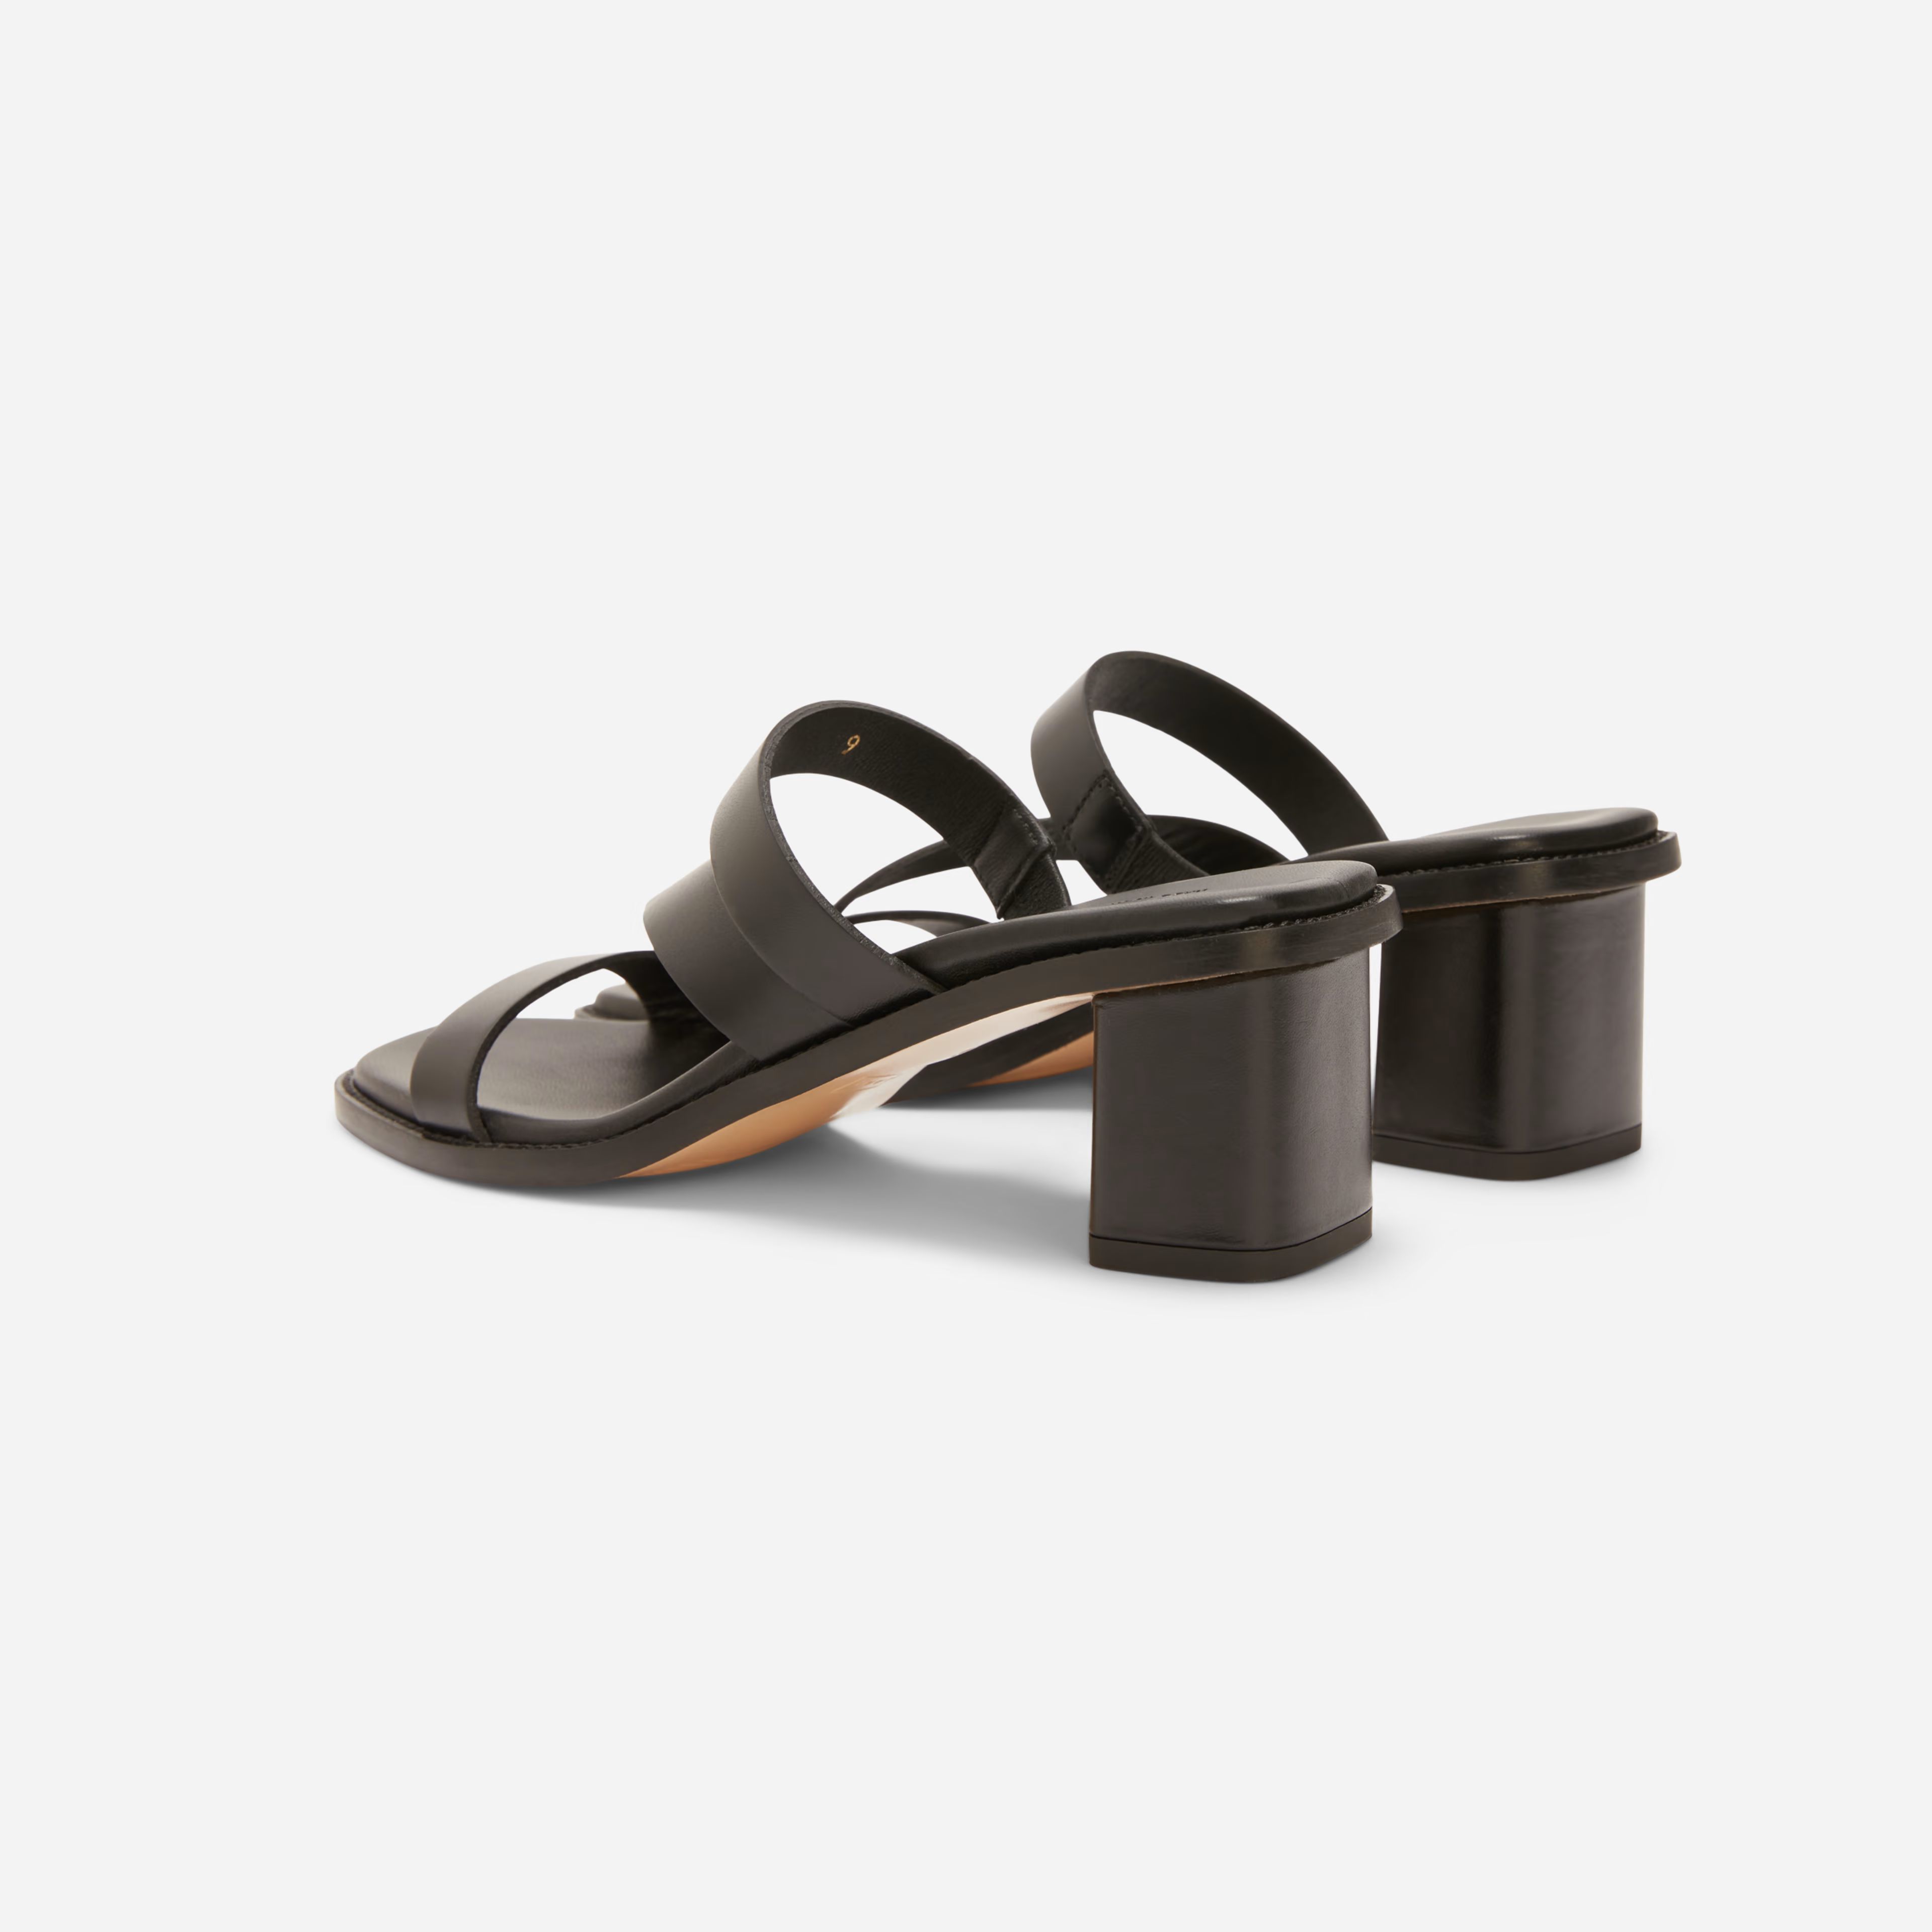 25% offWomenShoes & AccessoriesThe Italian Leather Tourist Heel$160$1208 Reviews4.8 out of 5 star... | Everlane